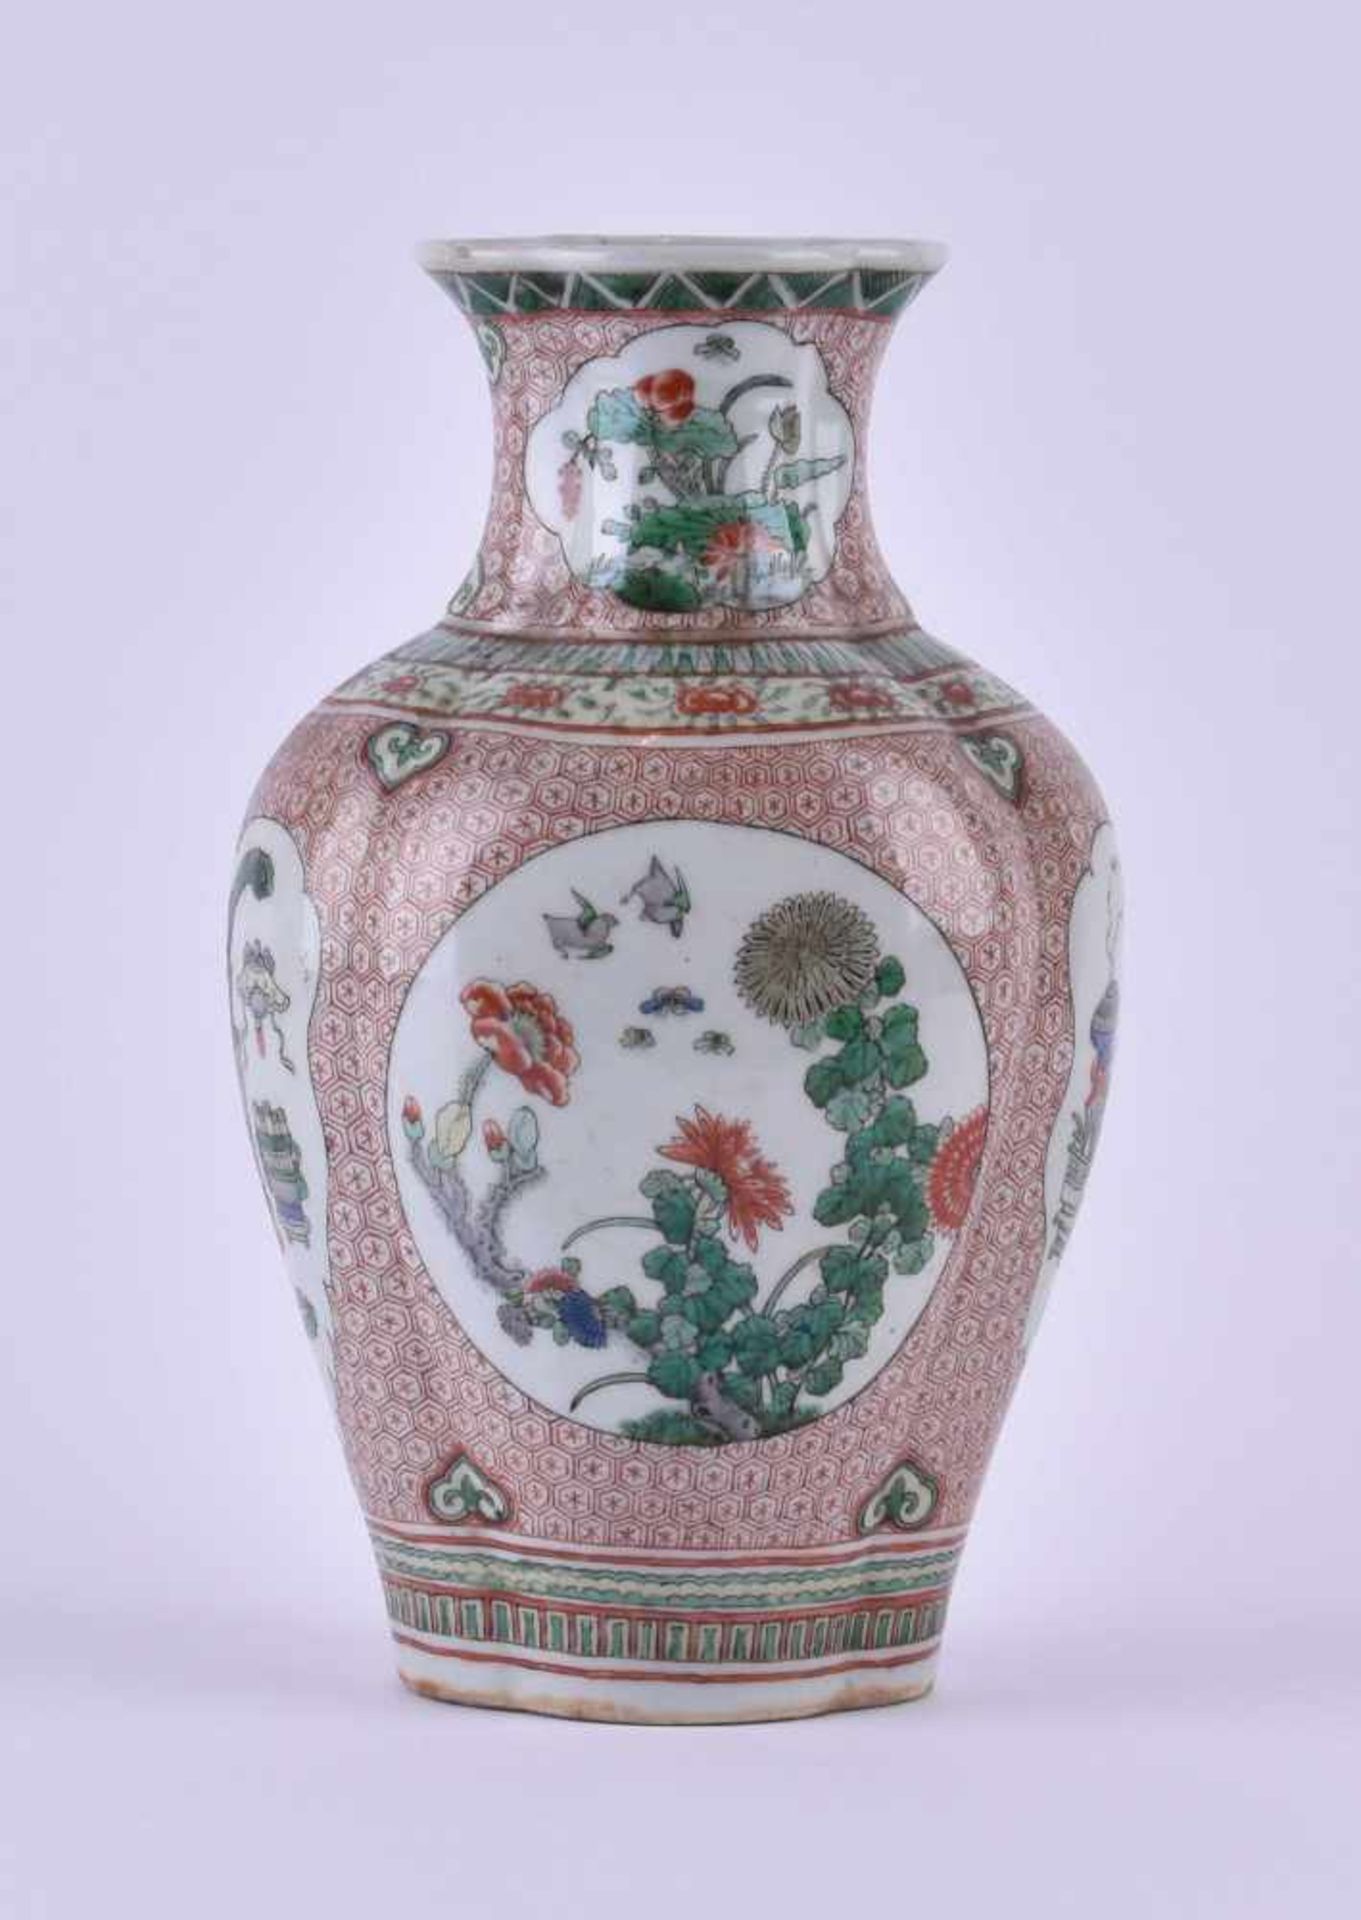 Vase China 19th centurycolorfully painted, under the bottom with an old collection number, at the